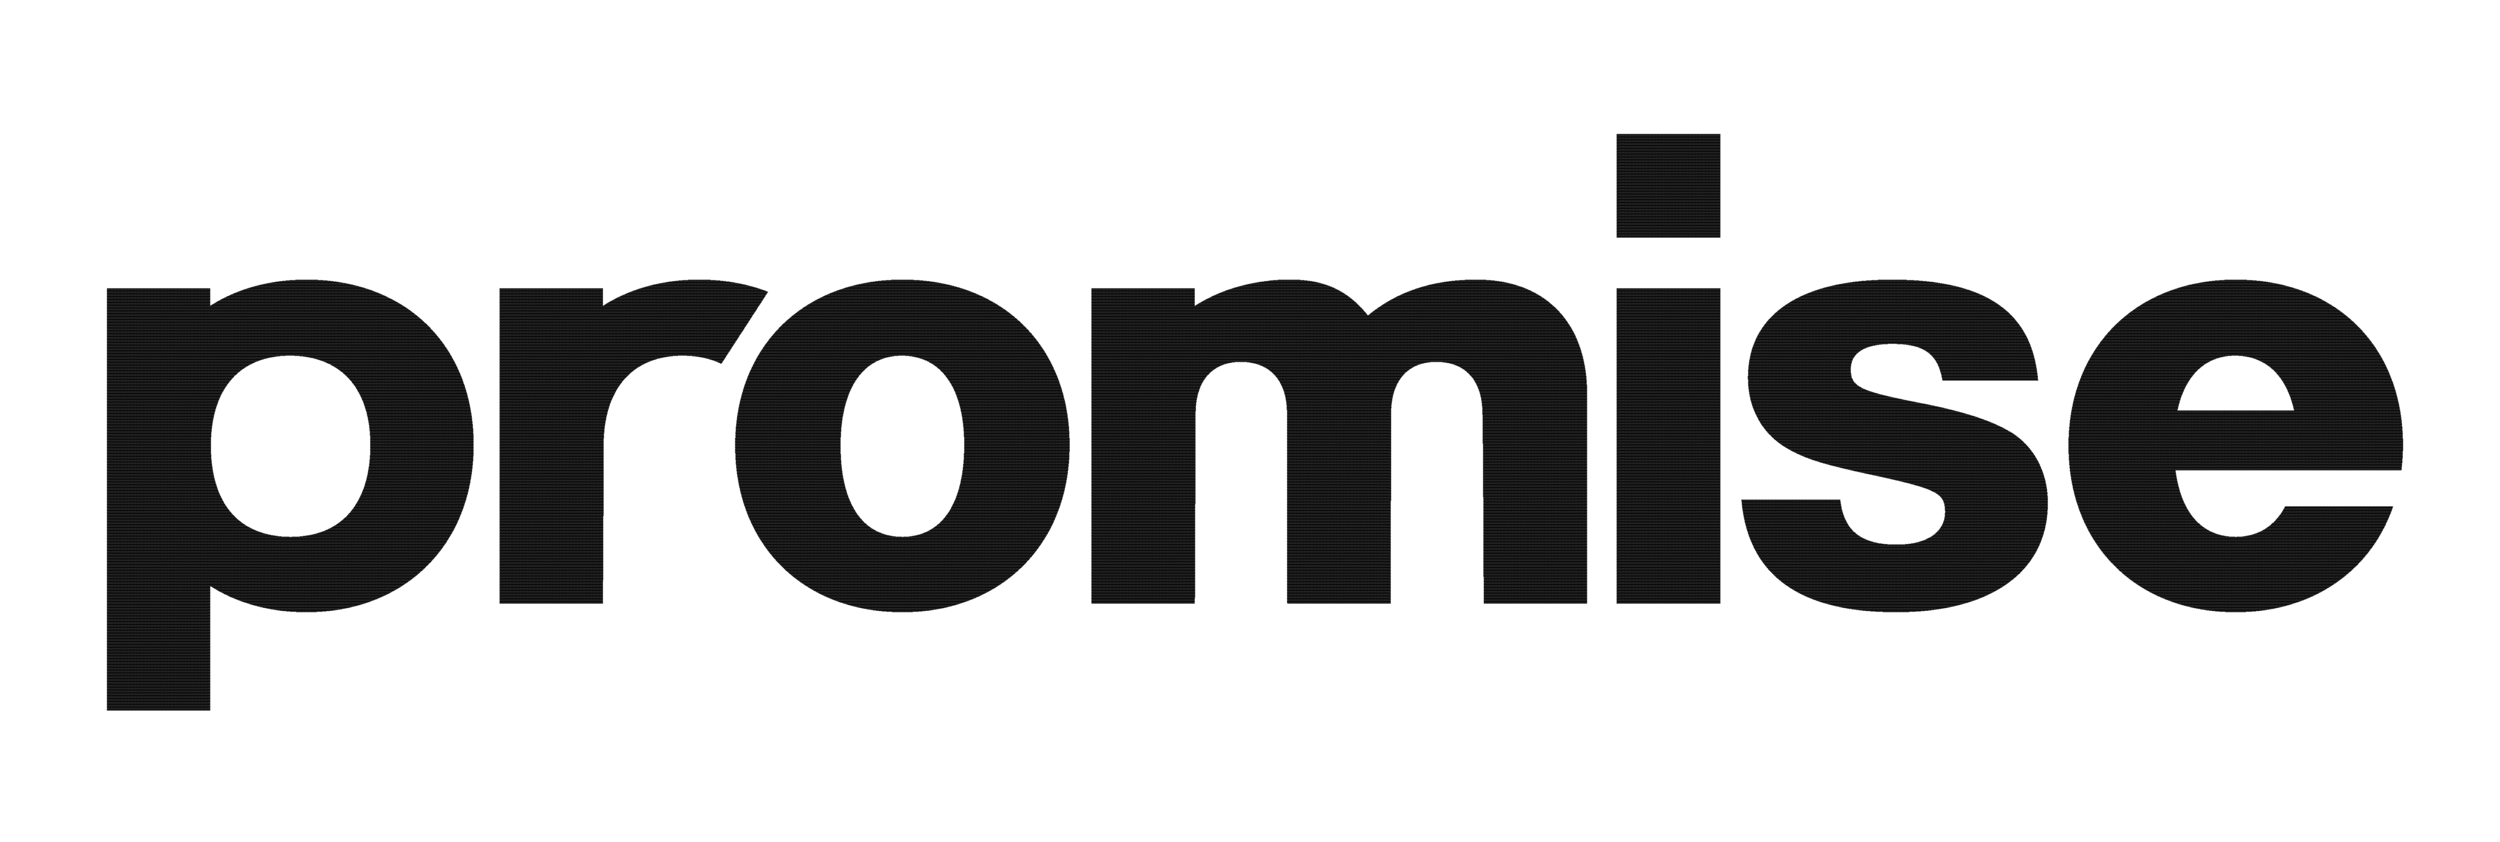 Promise logo 2019.png